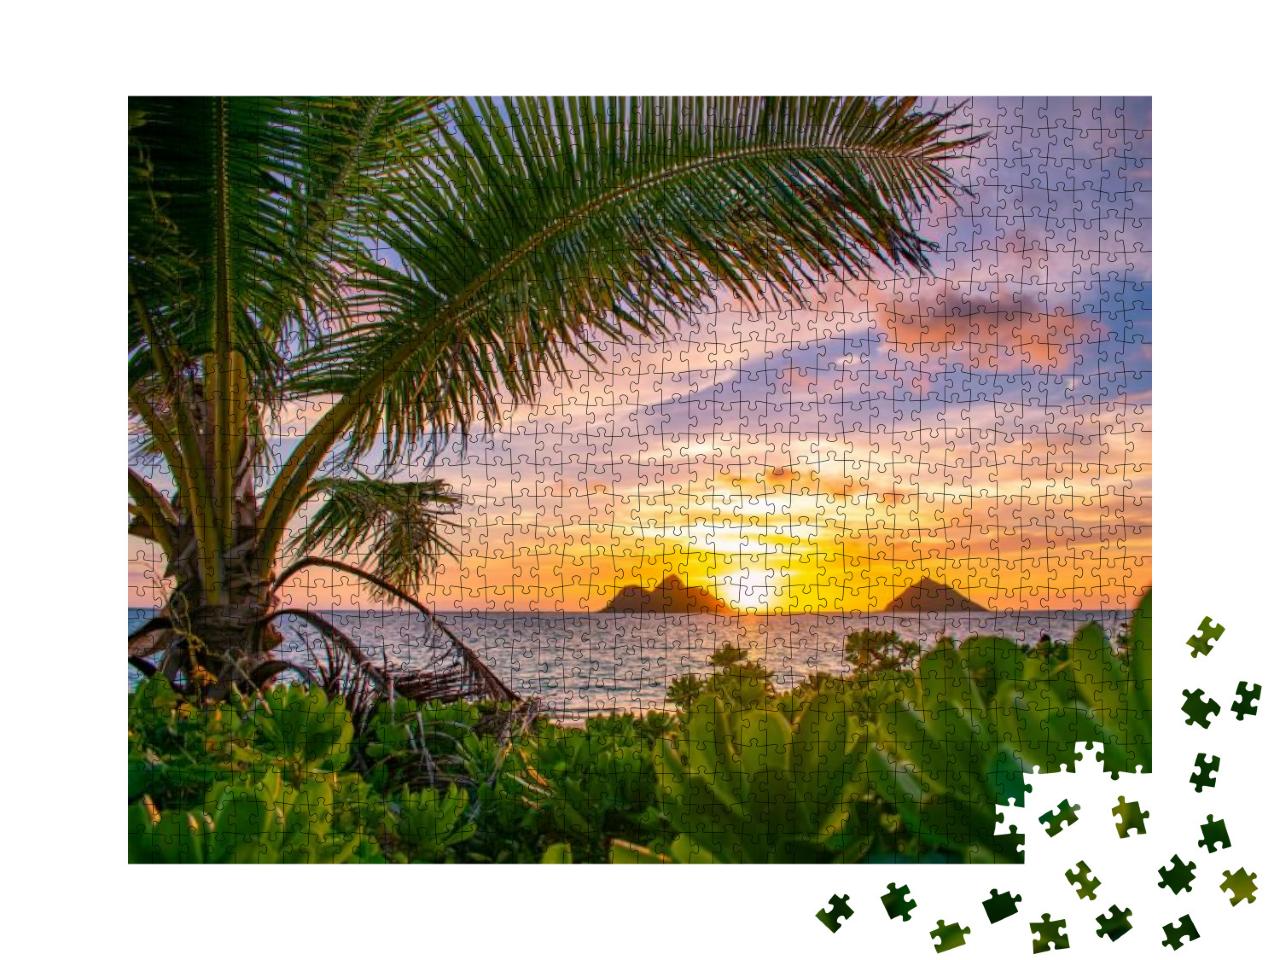 A Gorgeous Tropical Sunrise Over Lanikai Beach in Kailua... Jigsaw Puzzle with 1000 pieces